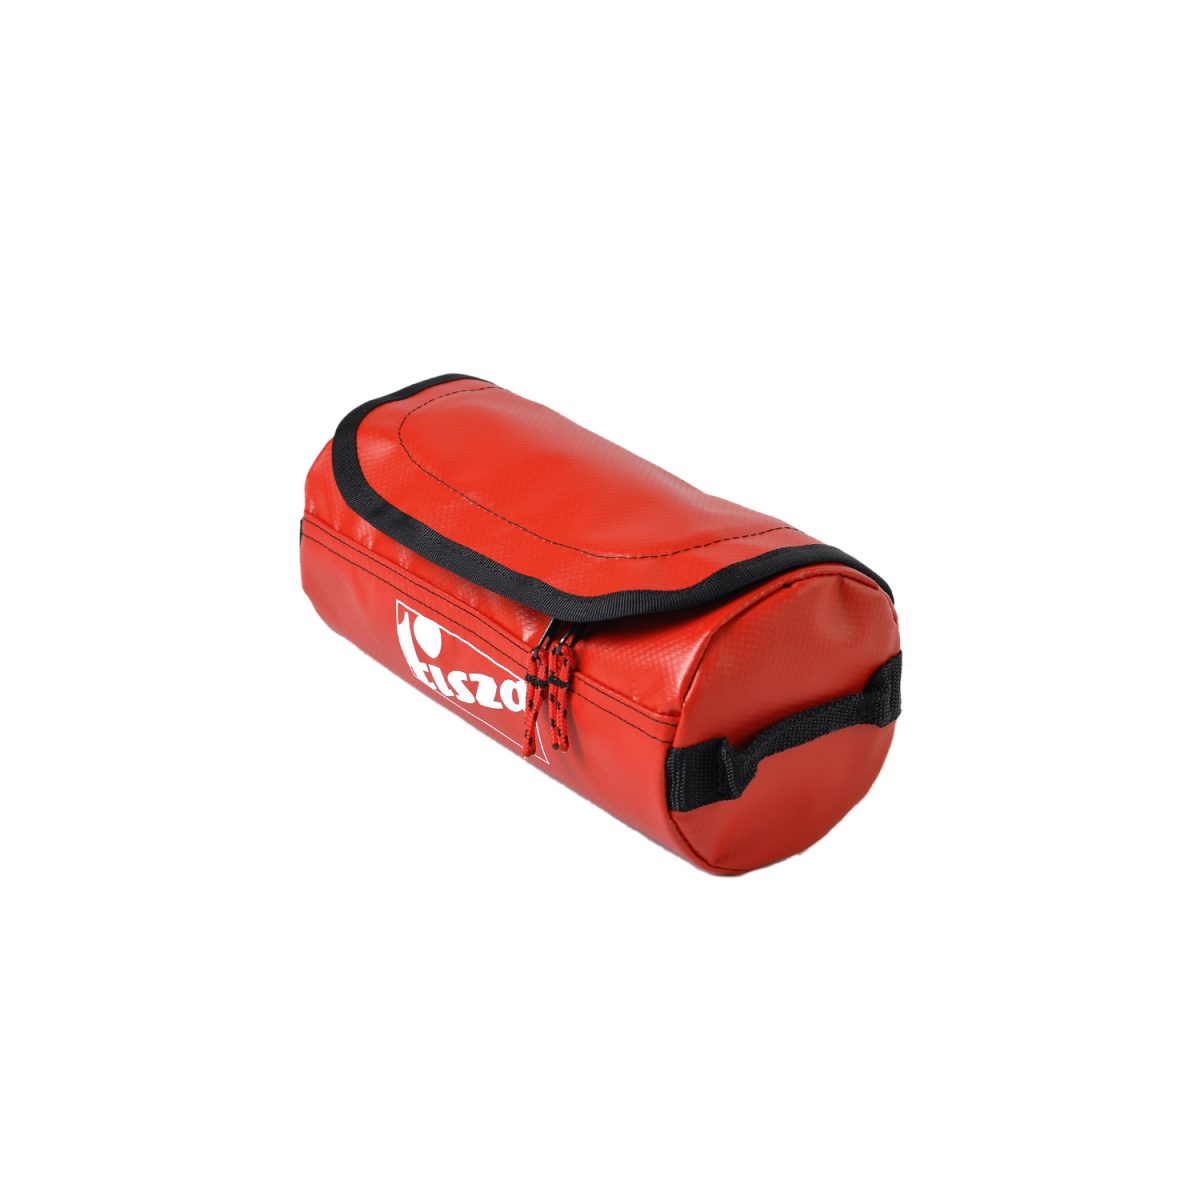 Tisza shoes - Toiletry bag - Red